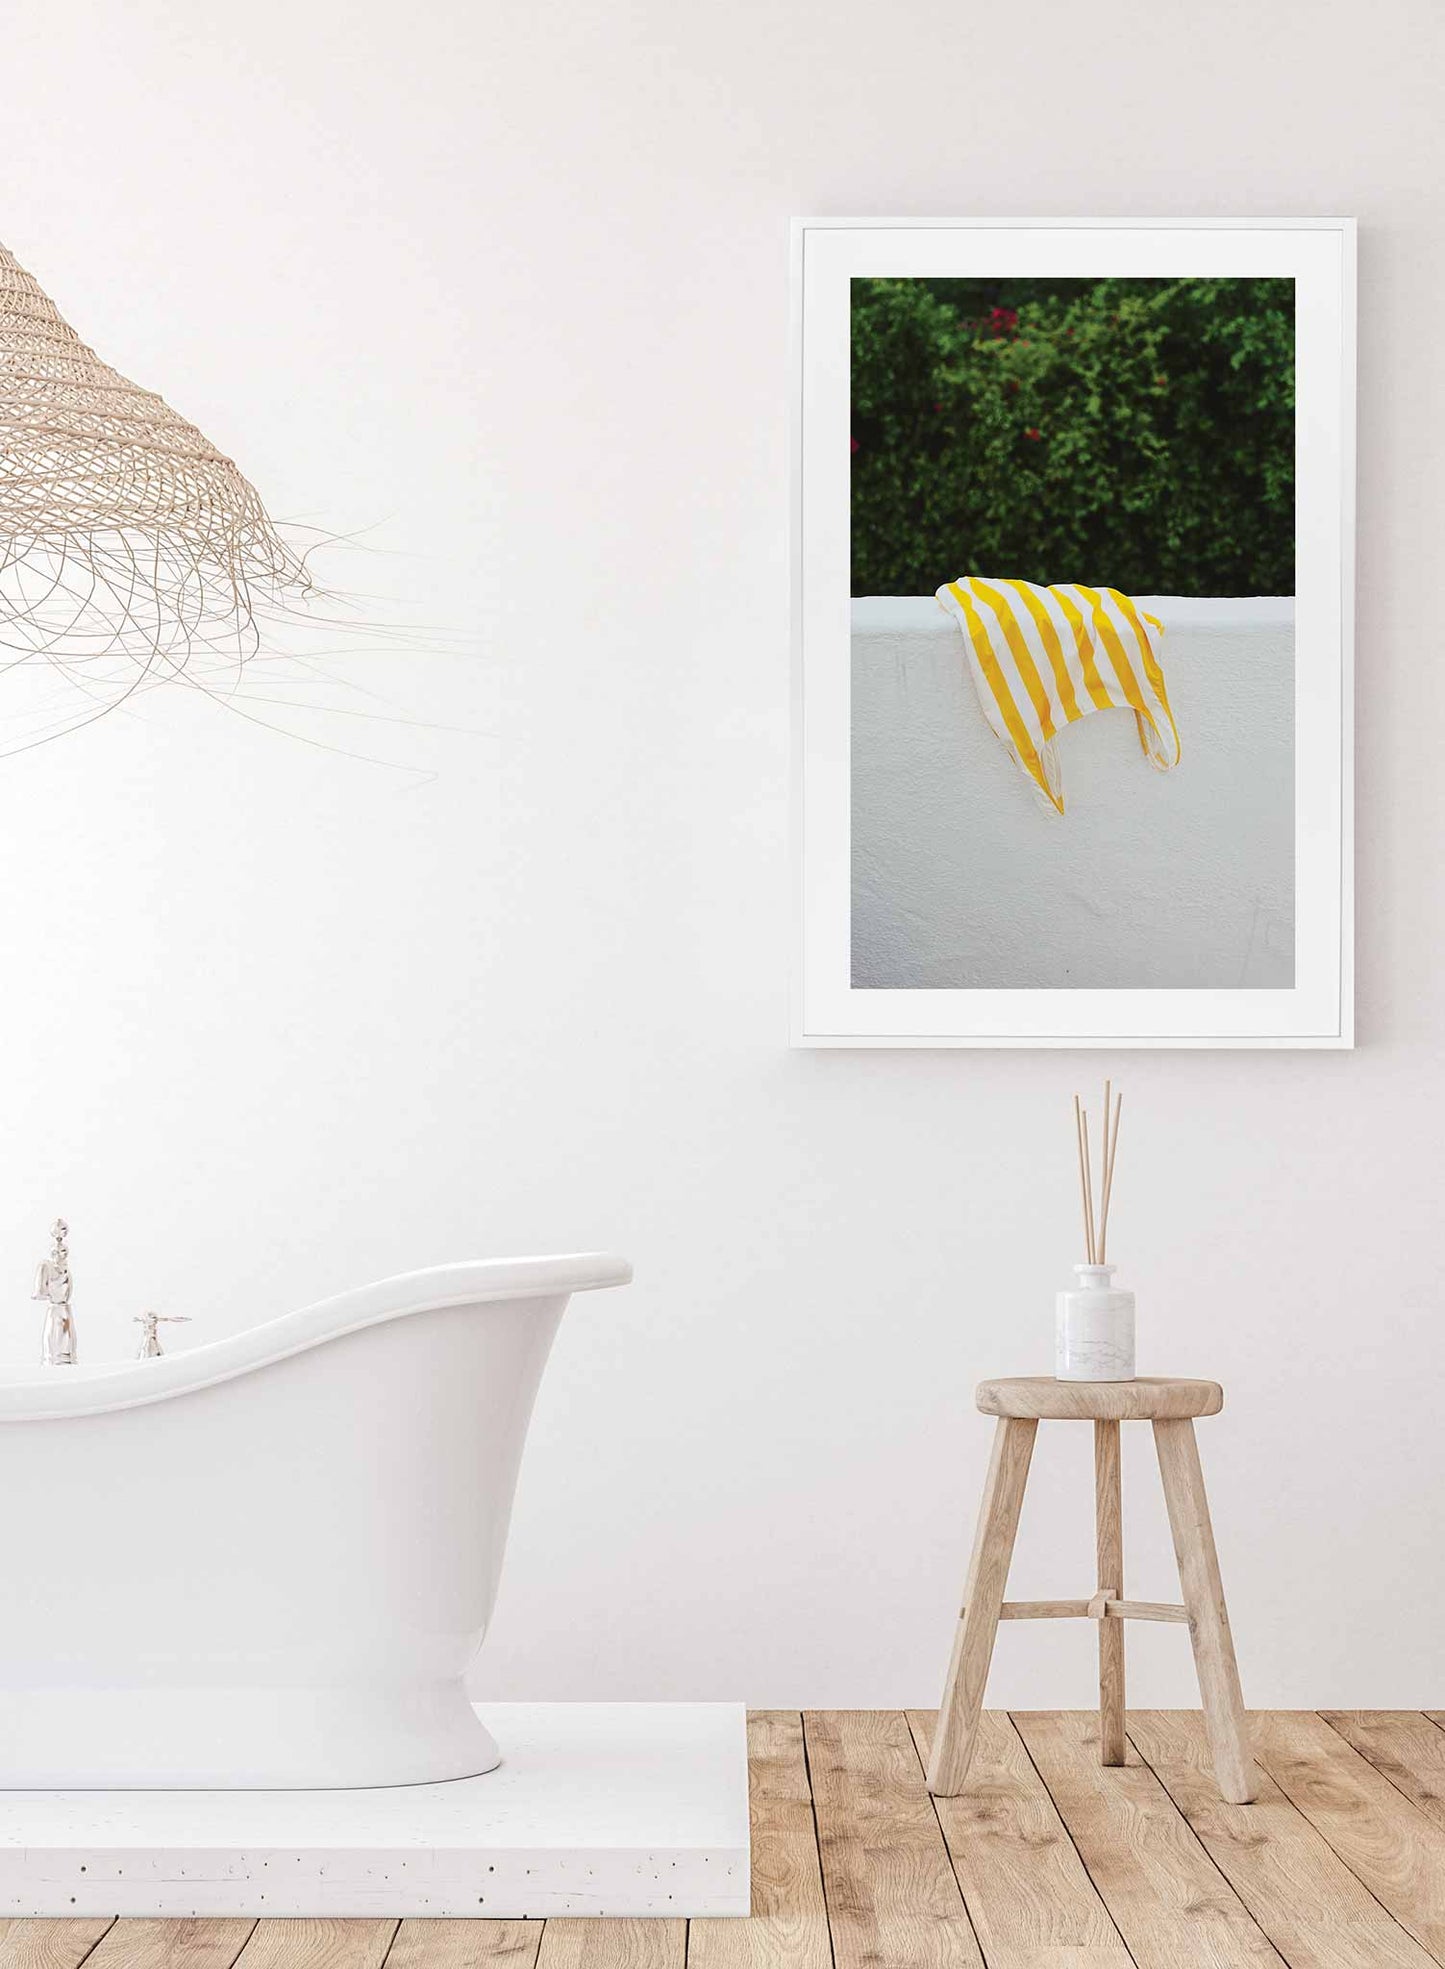 Skinny Dip is a colourful photography poster of a yellow stripped bathing suit by Opposite Wall.